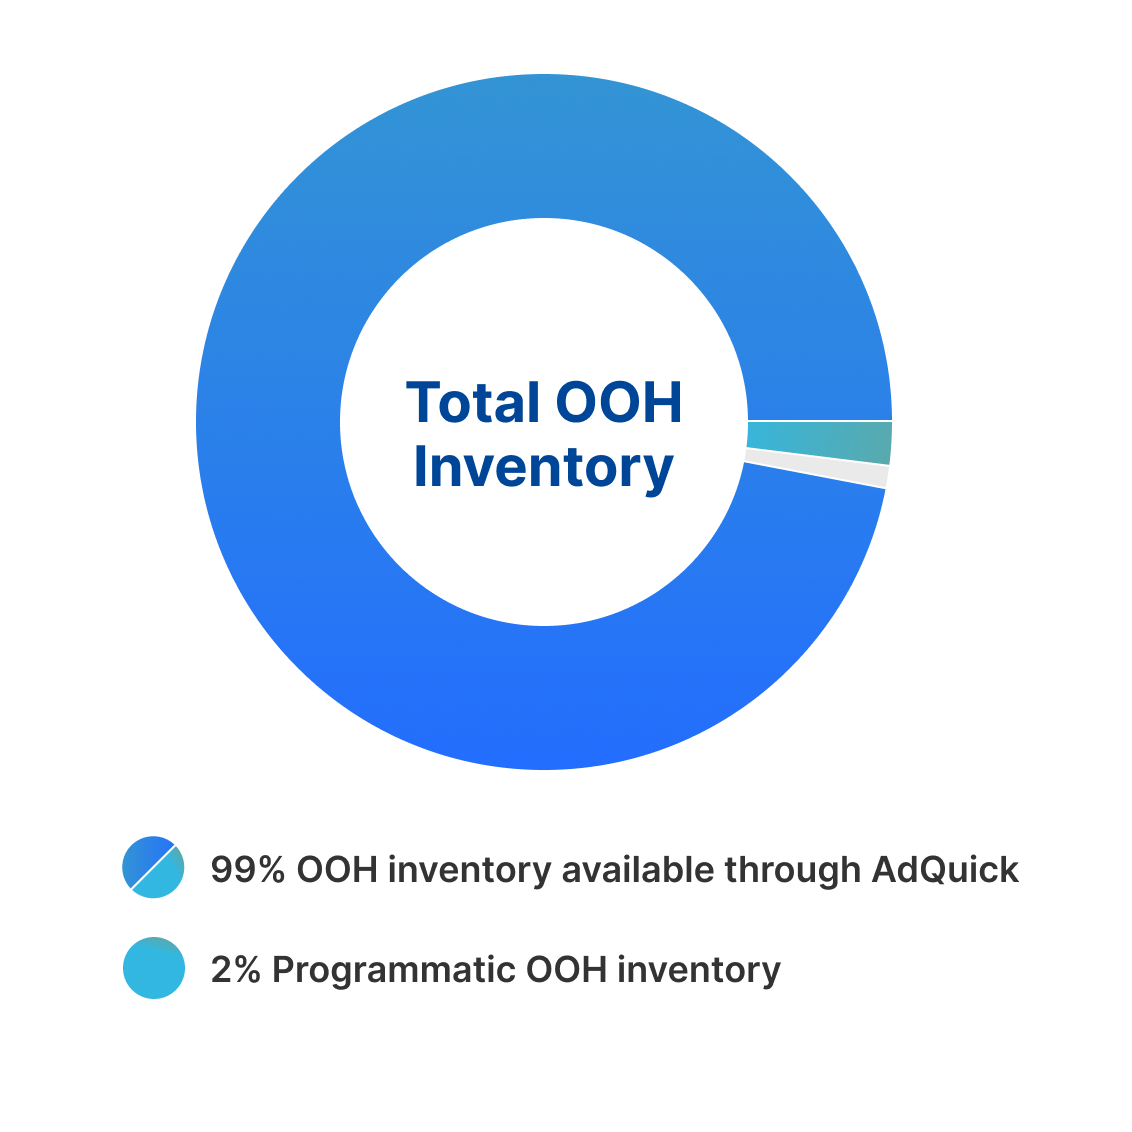 Total OOH Inventory